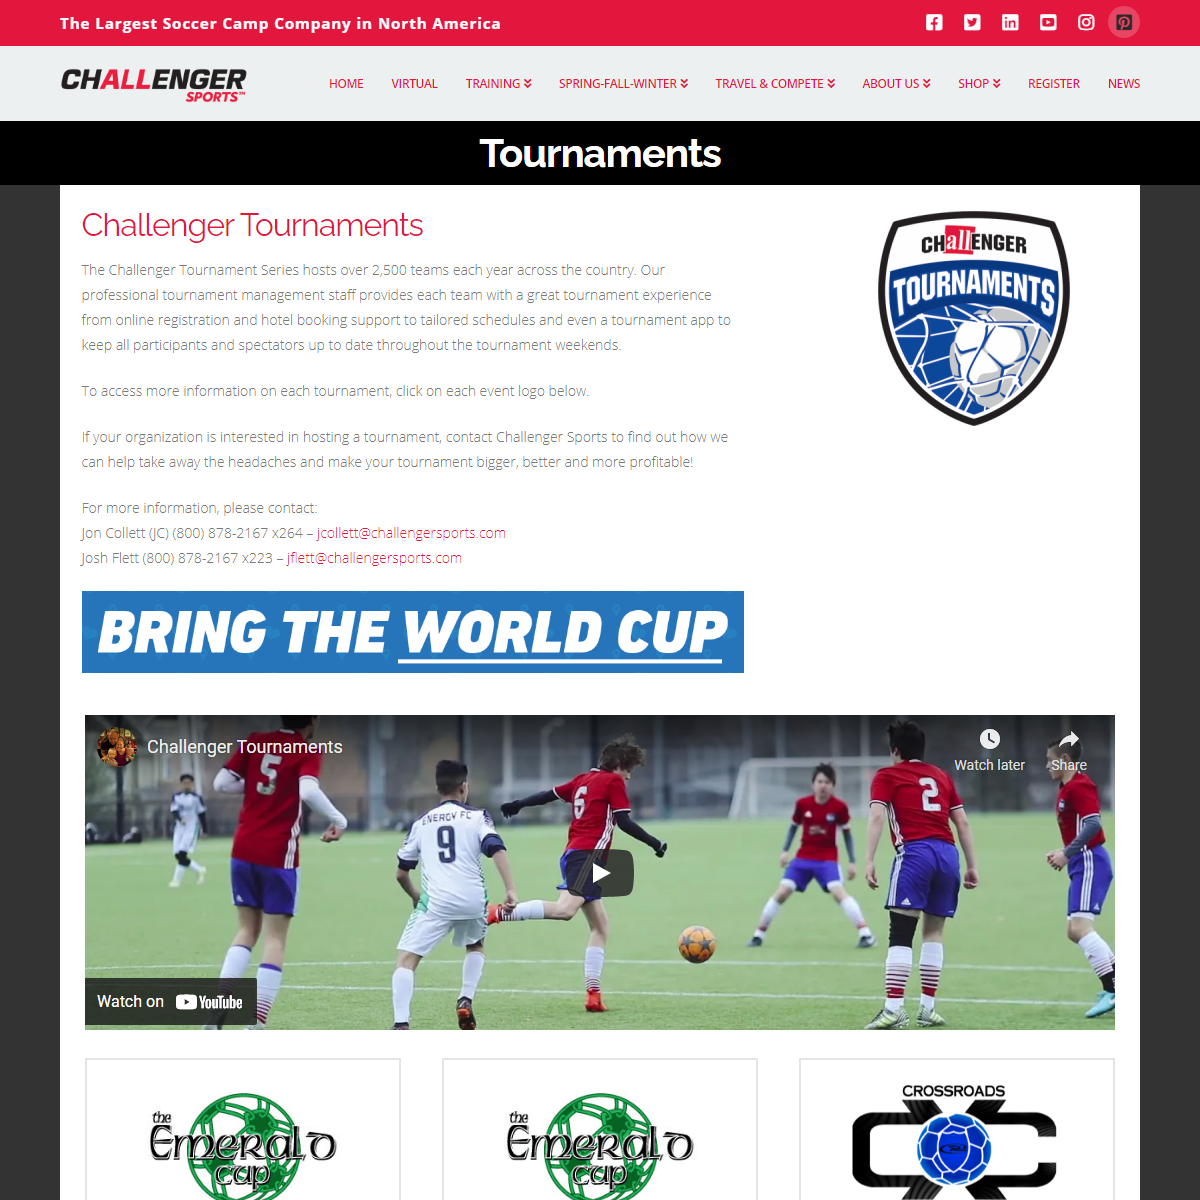 A complete backup of https://www.challengersports.com/tournaments/